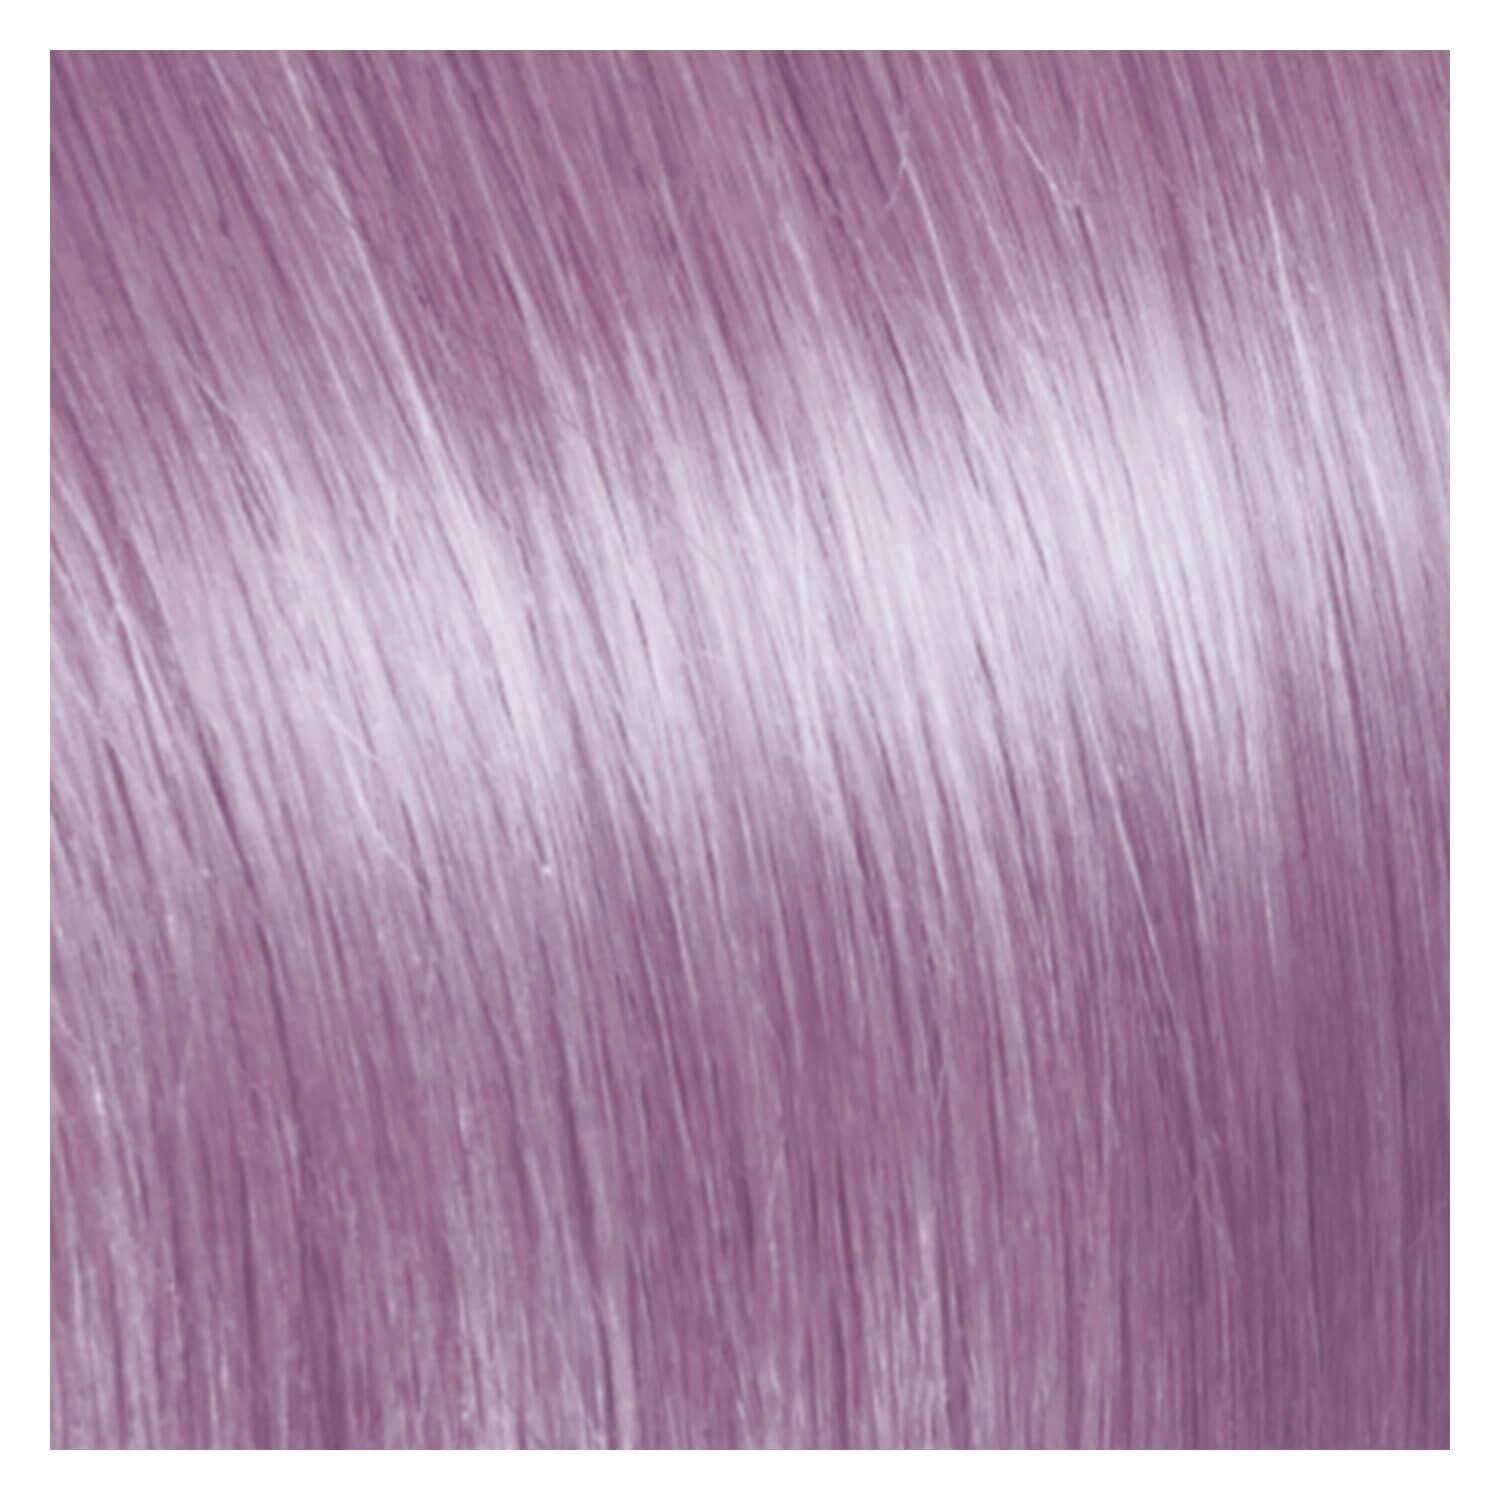 SHE Clip In-System Hair Extensions - Purple 40cm